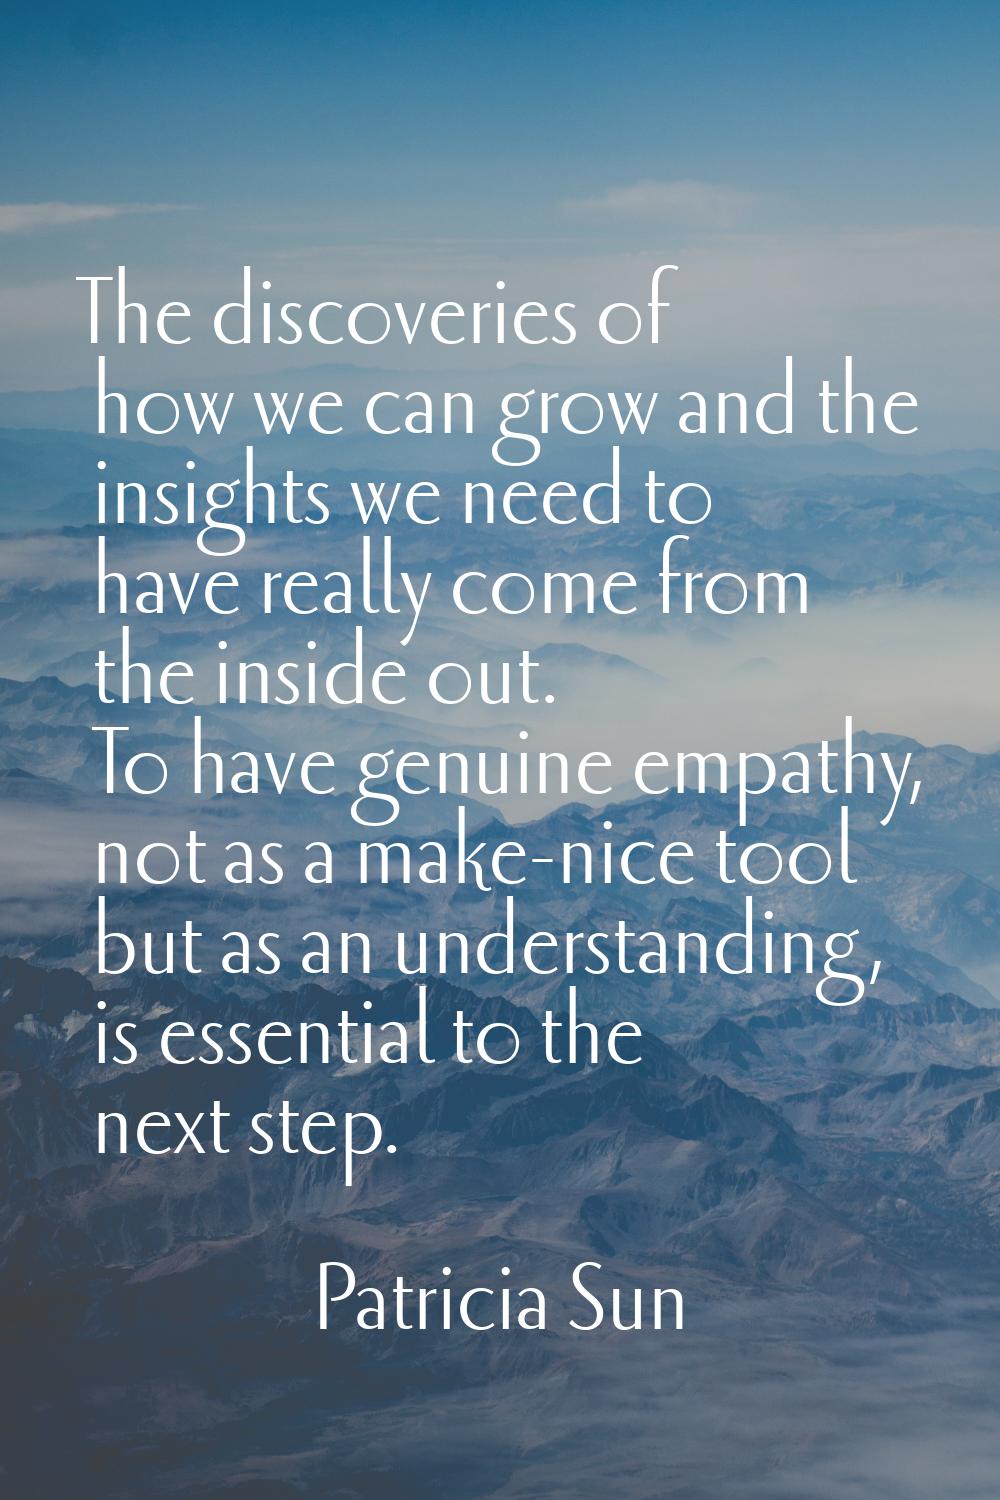 The discoveries of how we can grow and the insights we need to have really come from the inside out